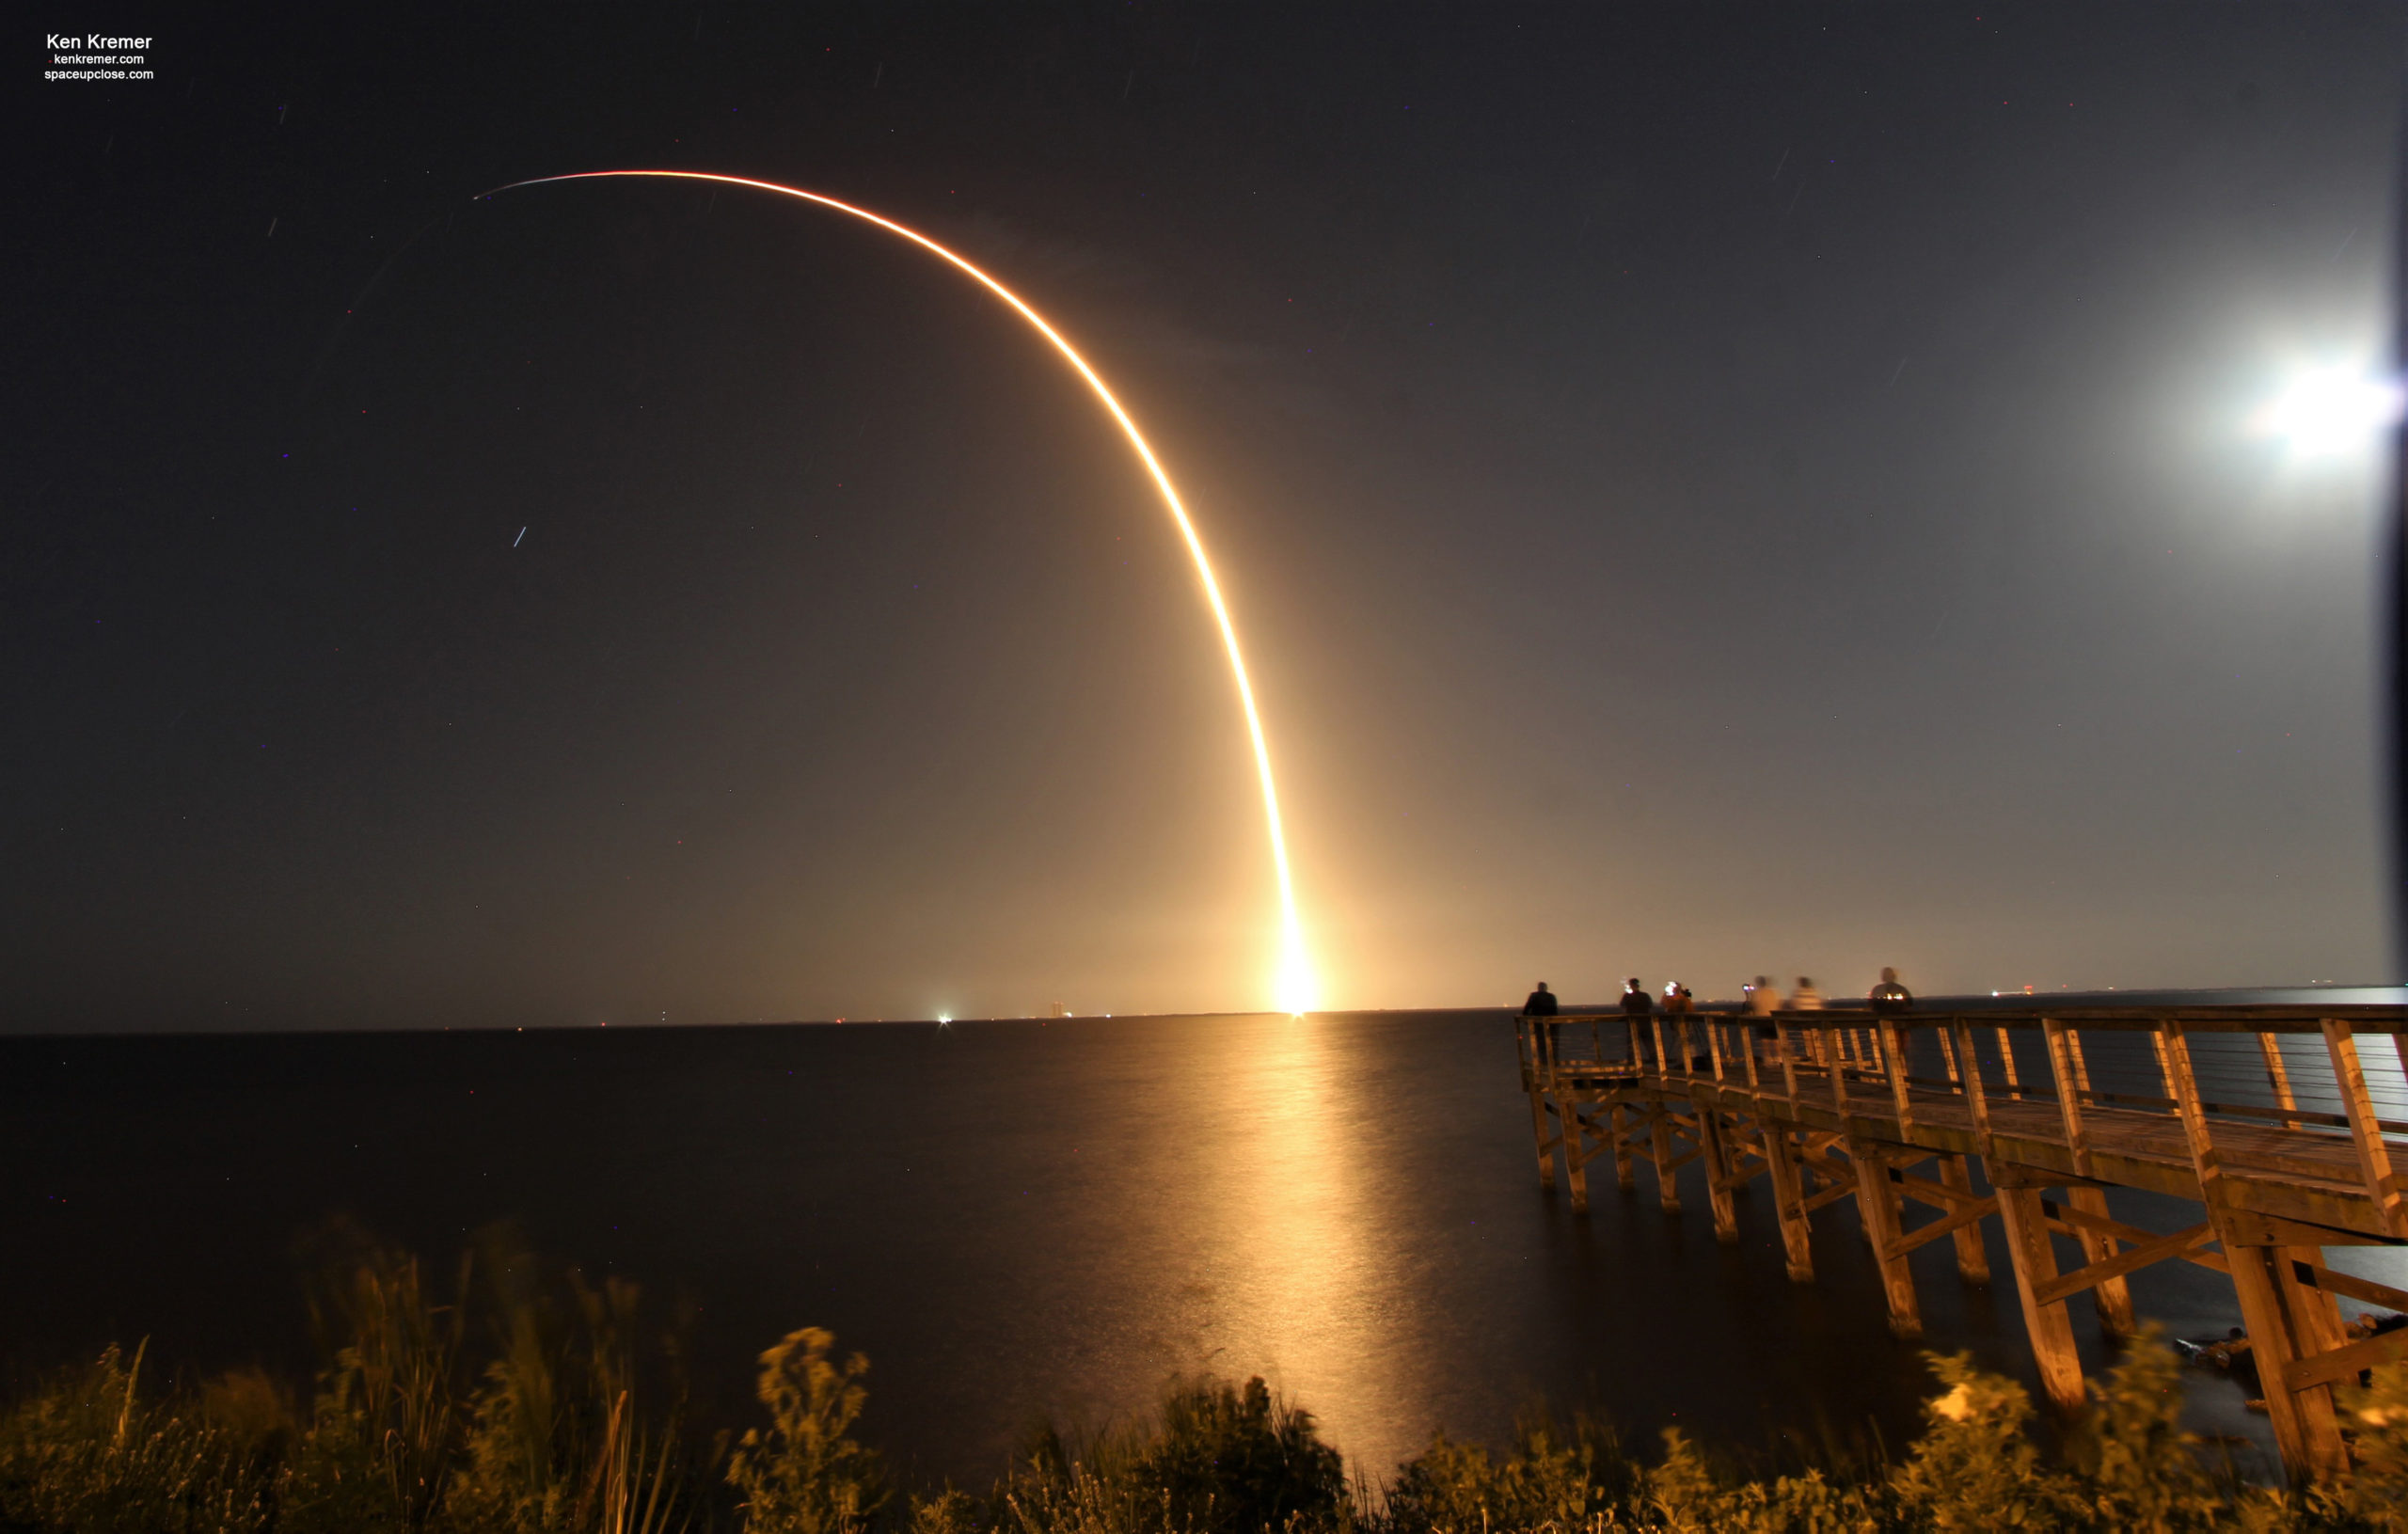 Recycled SpaceX Falcon 9 Streaks to Orbit on Nighttime Delivery Next Batch Starlink Satellites to Orbit: Photos